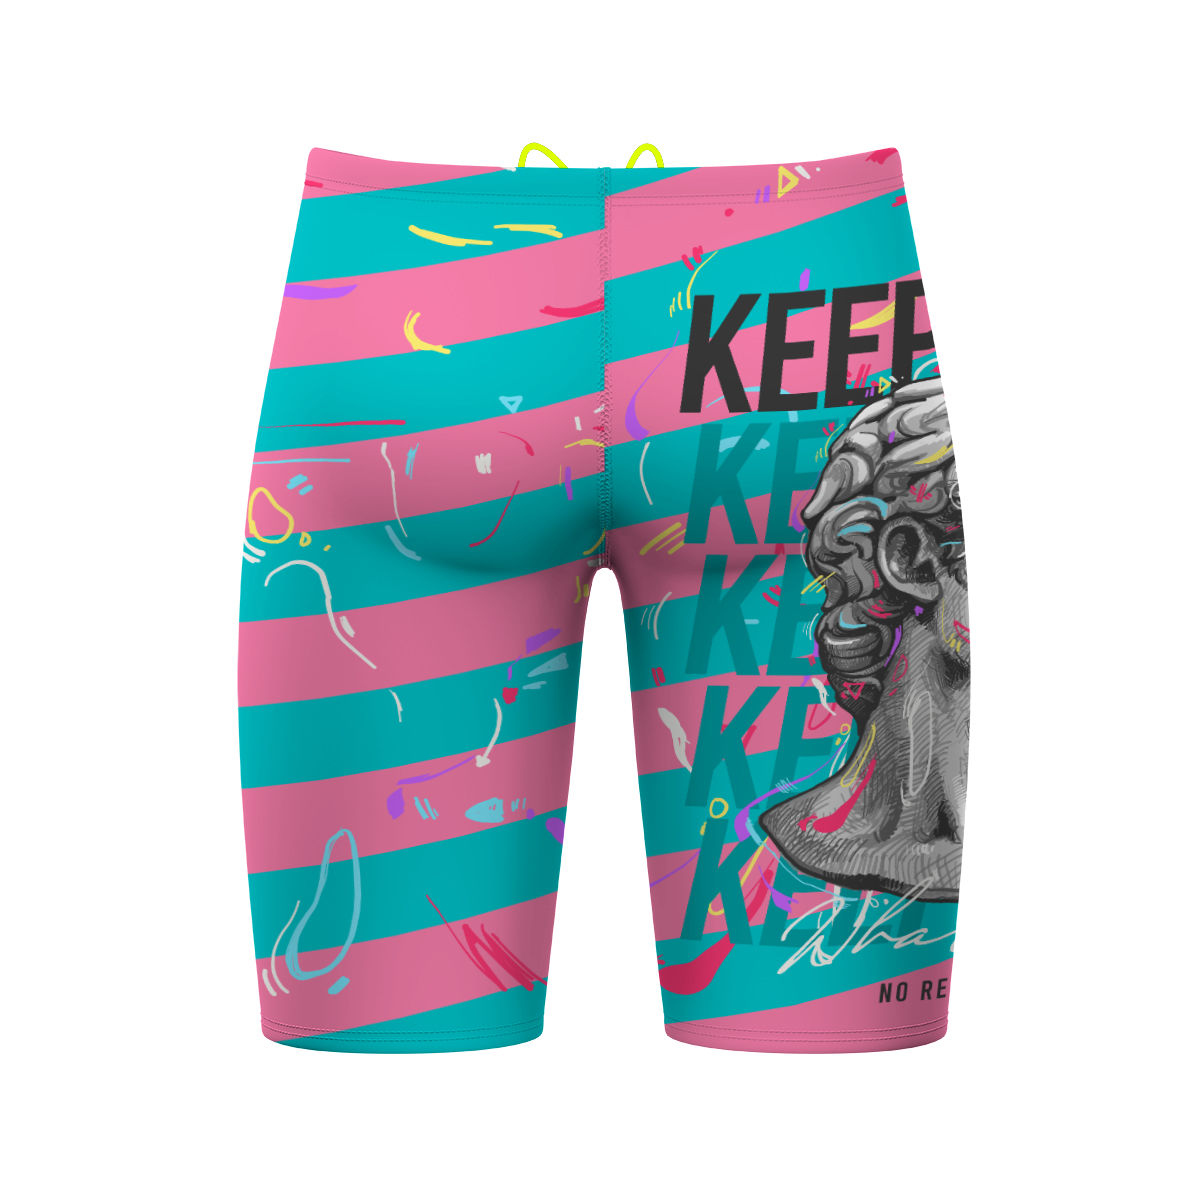 Keep Cool - Jammer Swimsuit